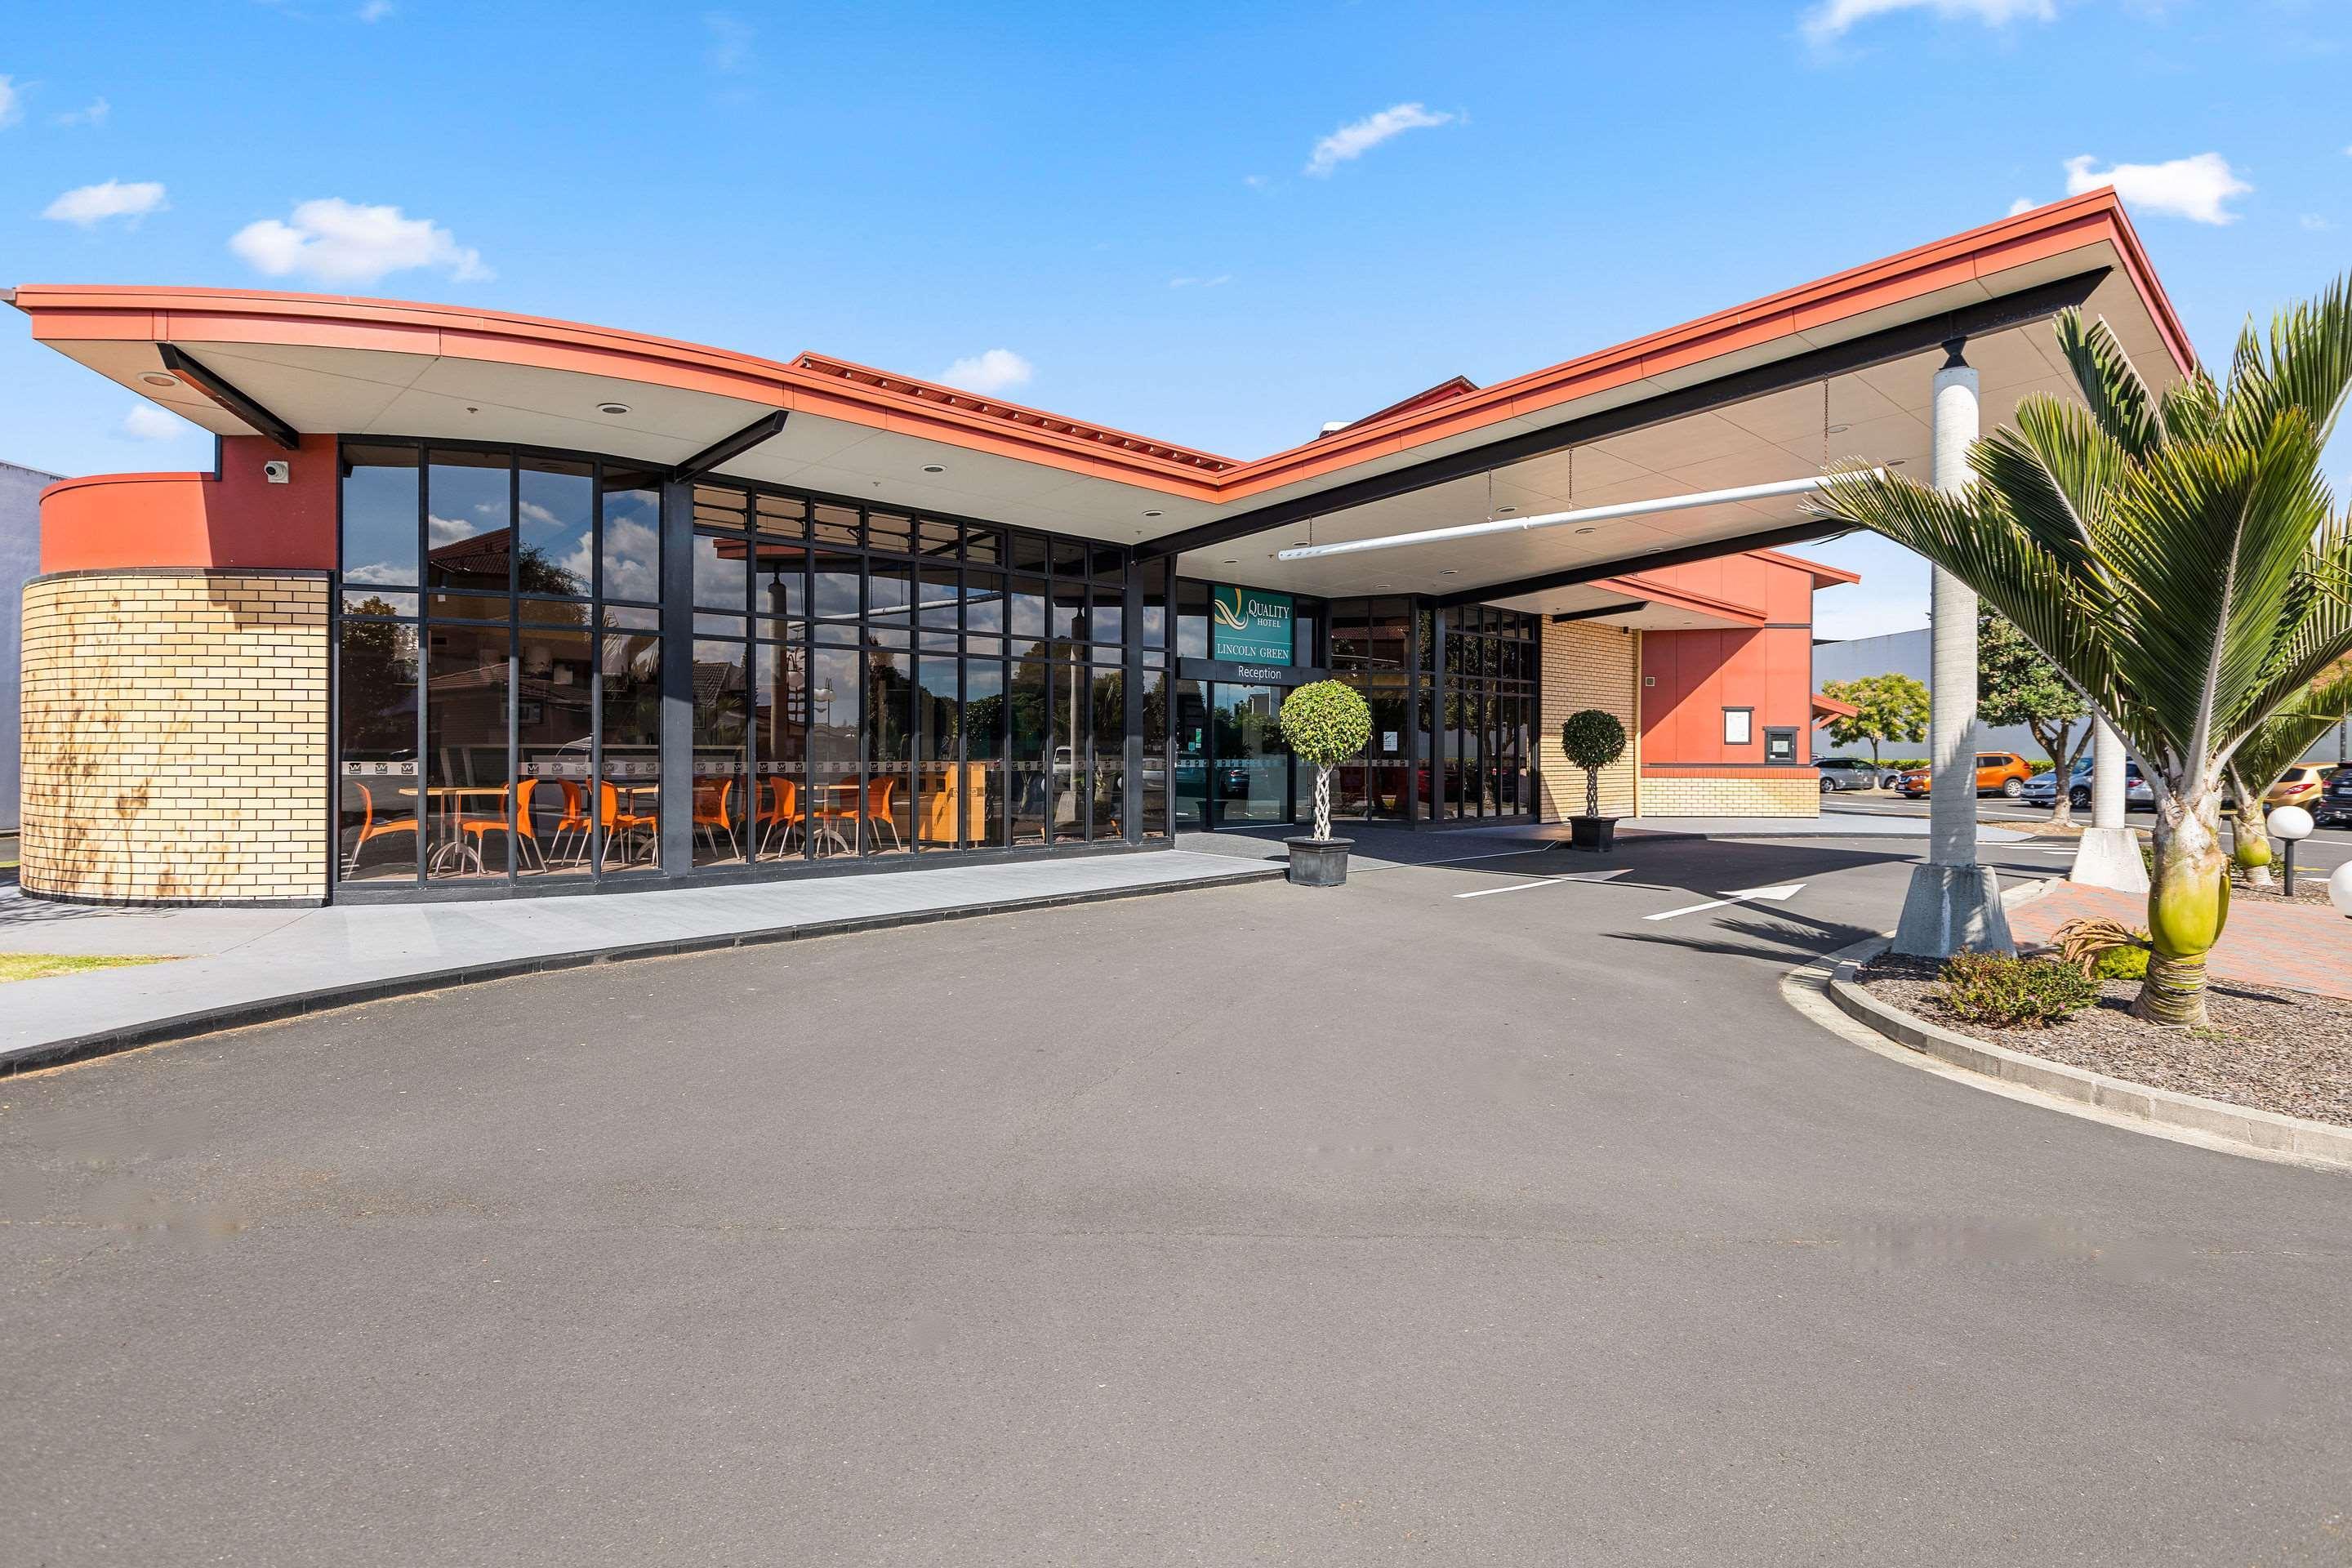 Quality Hotel Lincoln Green Auckland Exterior photo